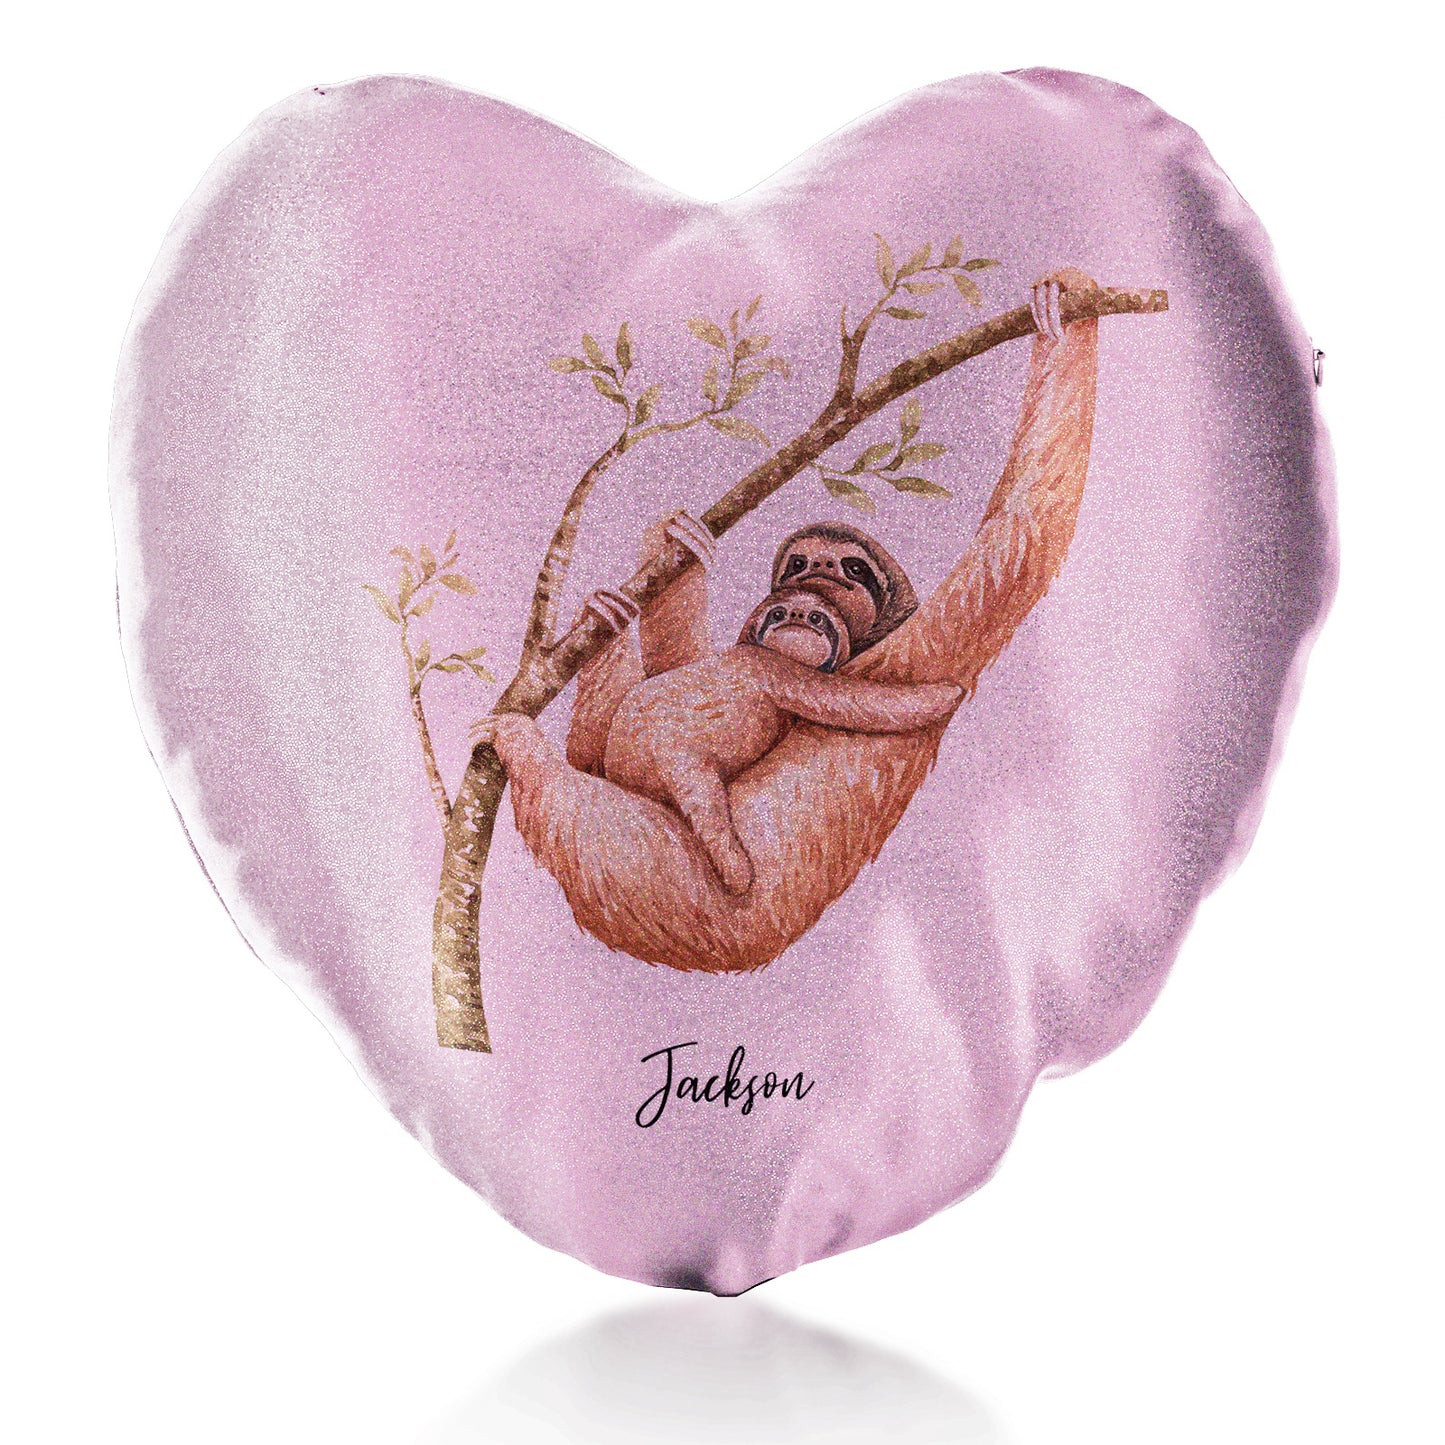 Personalised Glitter Heart Cushion with Welcoming Text and Climbing Mum and Baby Sloths